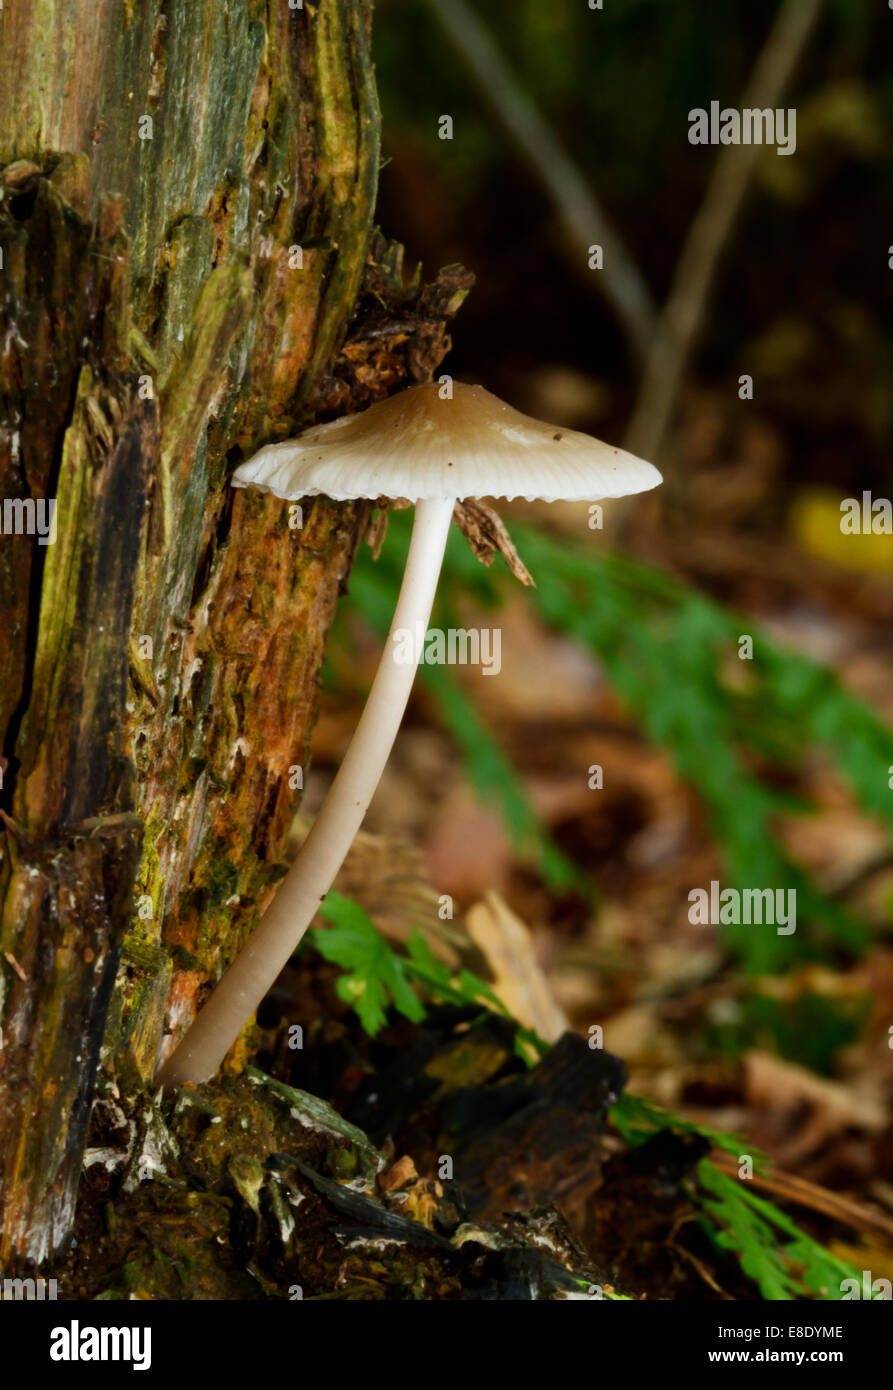 Small white mushroom growing on a rotting tree trunk Stock Photo